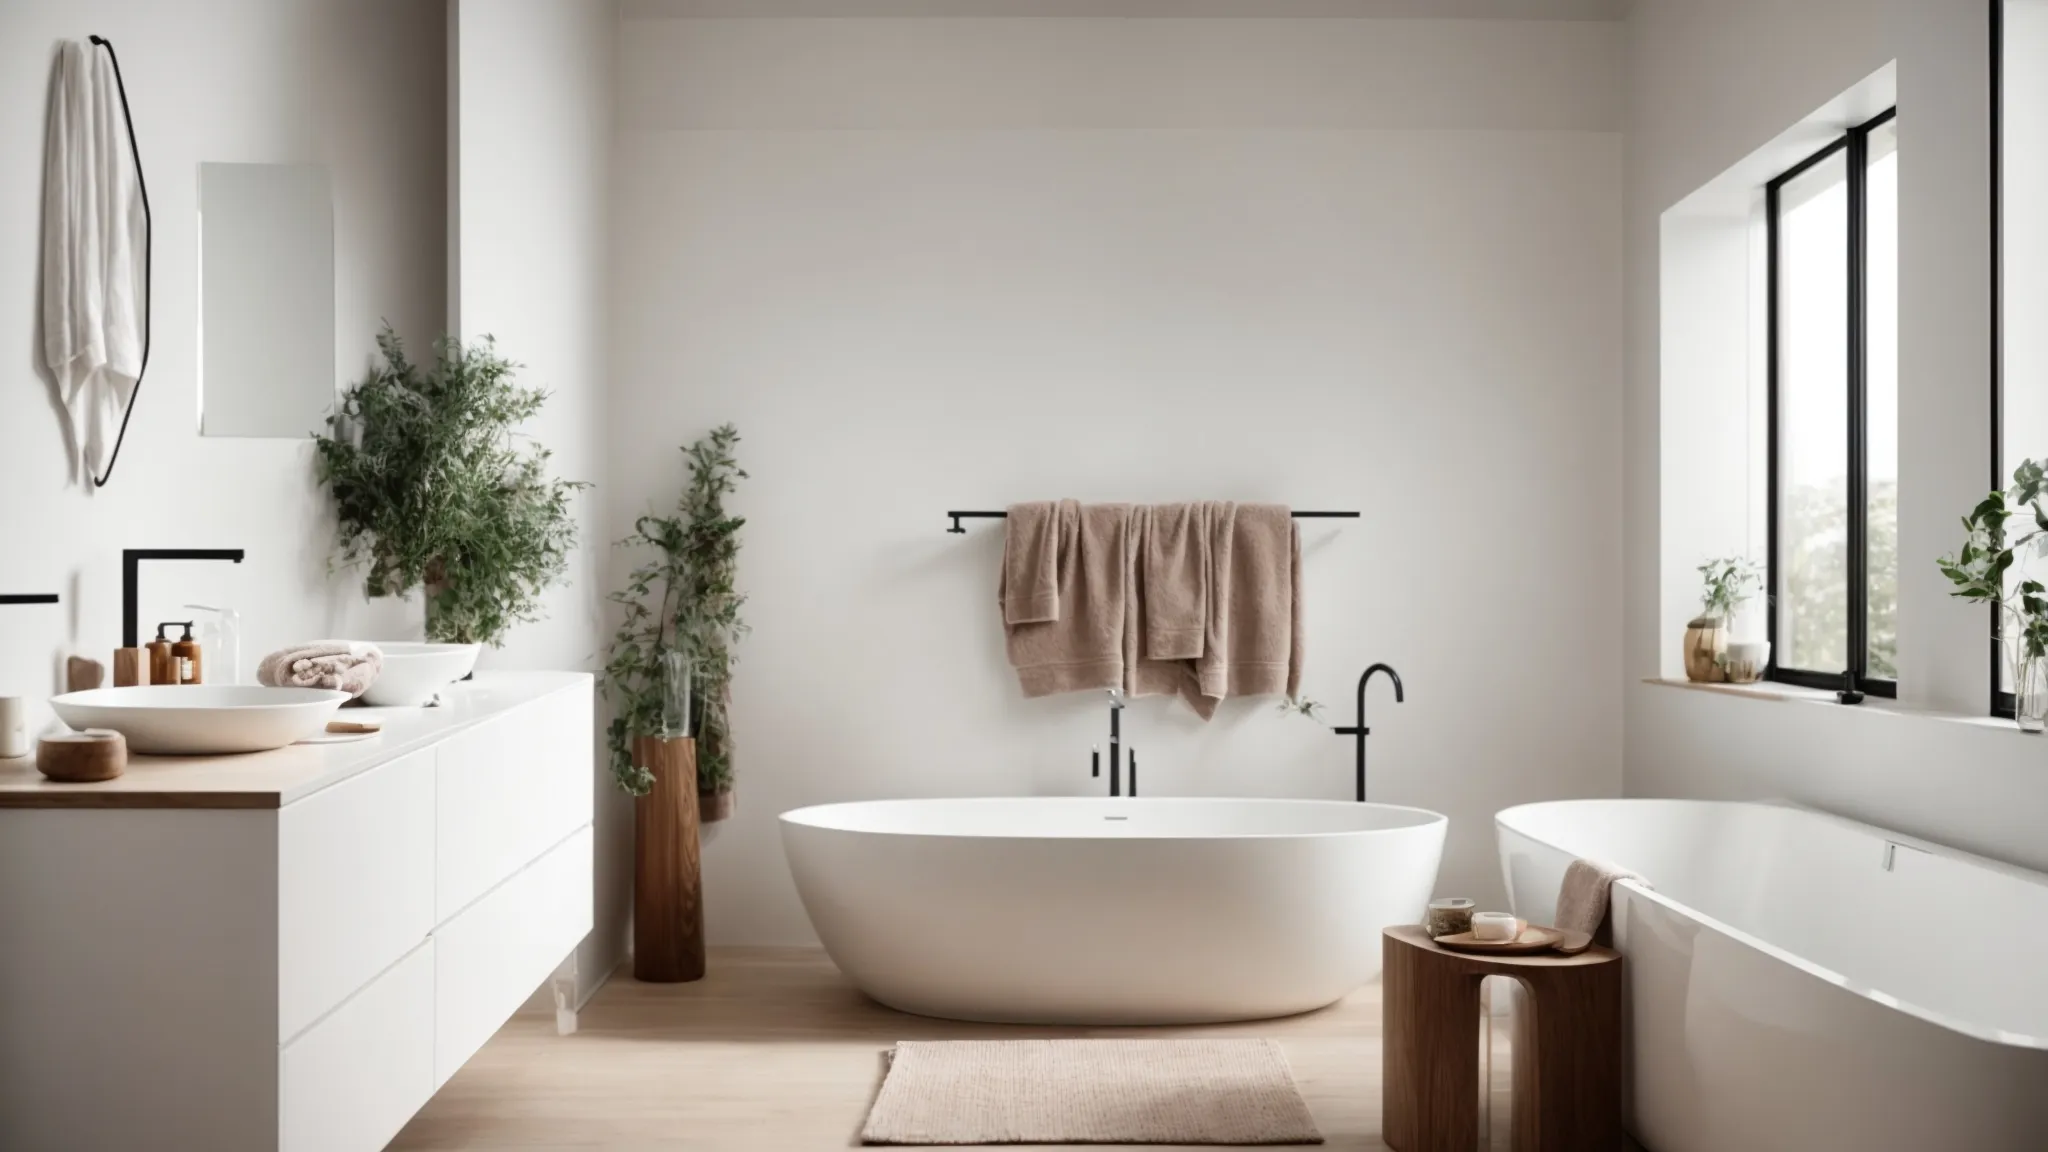 a sleek, modern bathroom with clean lines, featuring a standalone bathtub and minimalistic decor, embodying the essence of a well-planned renovation.